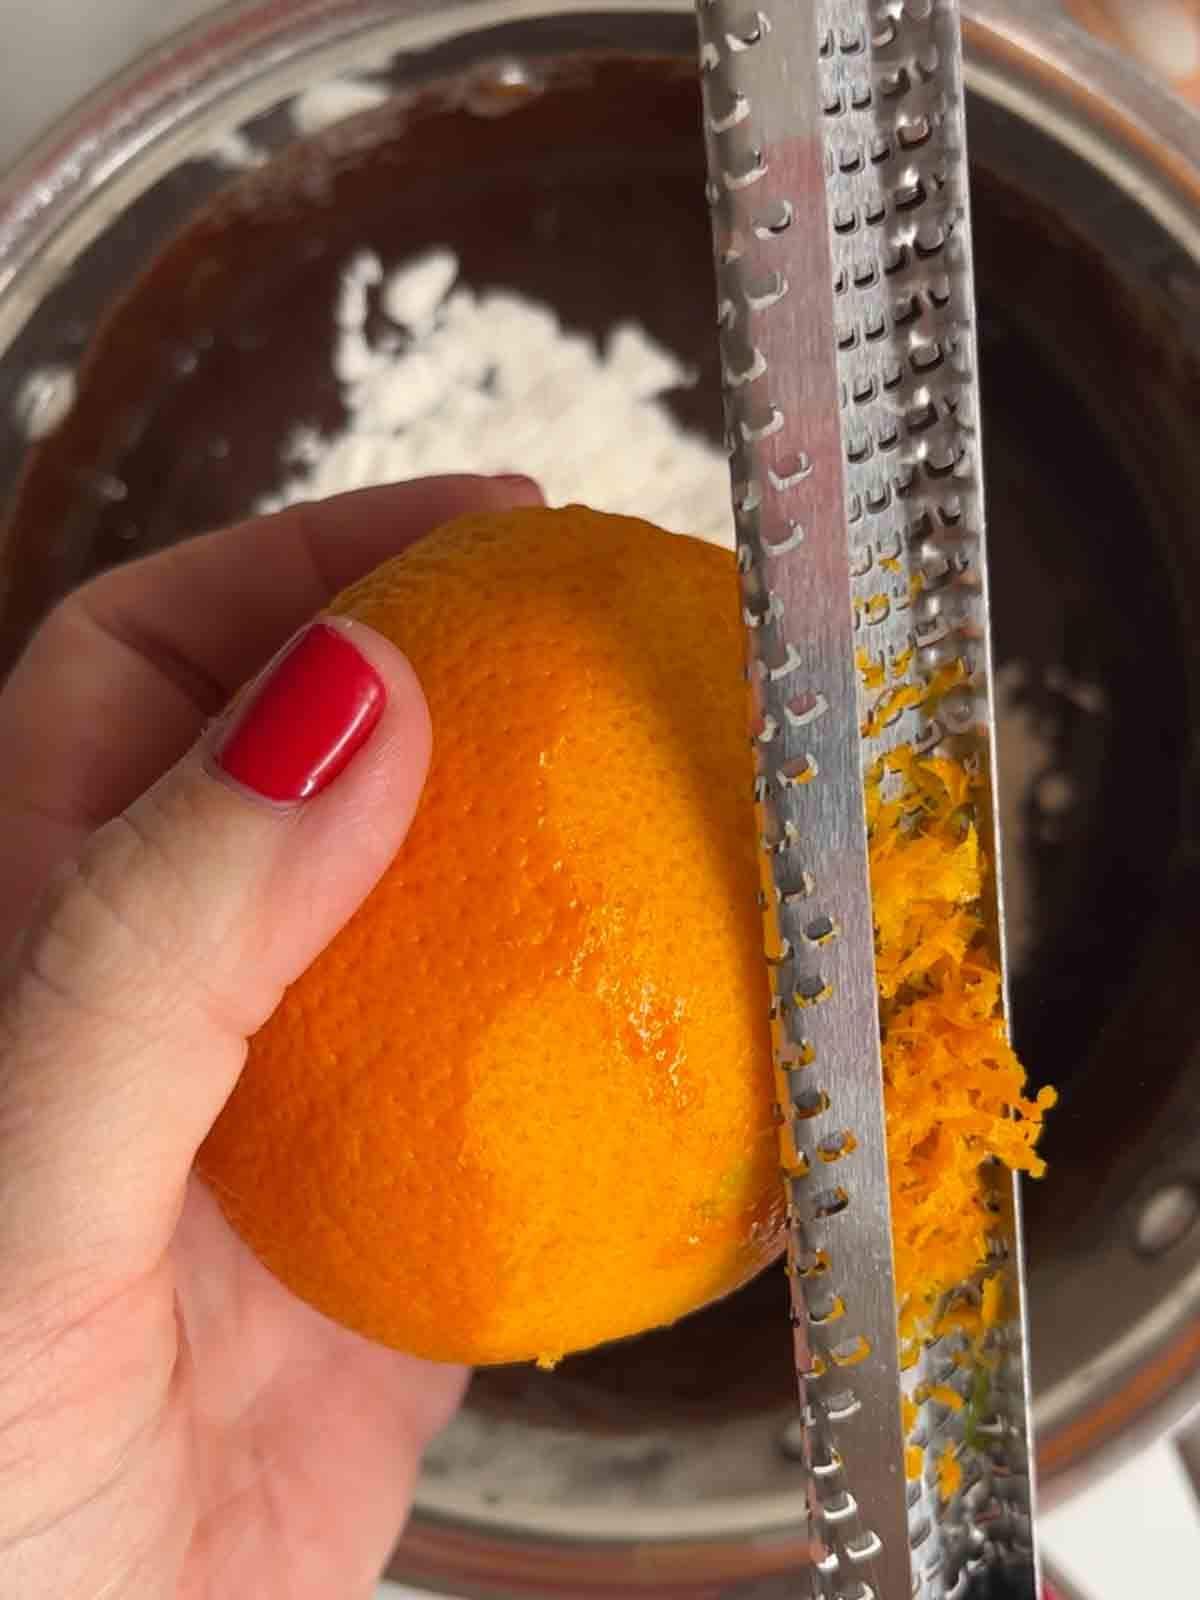 An orange being zested above a pan of melted chocolate for the recipe Terry's Chocolate Orange Brownies.